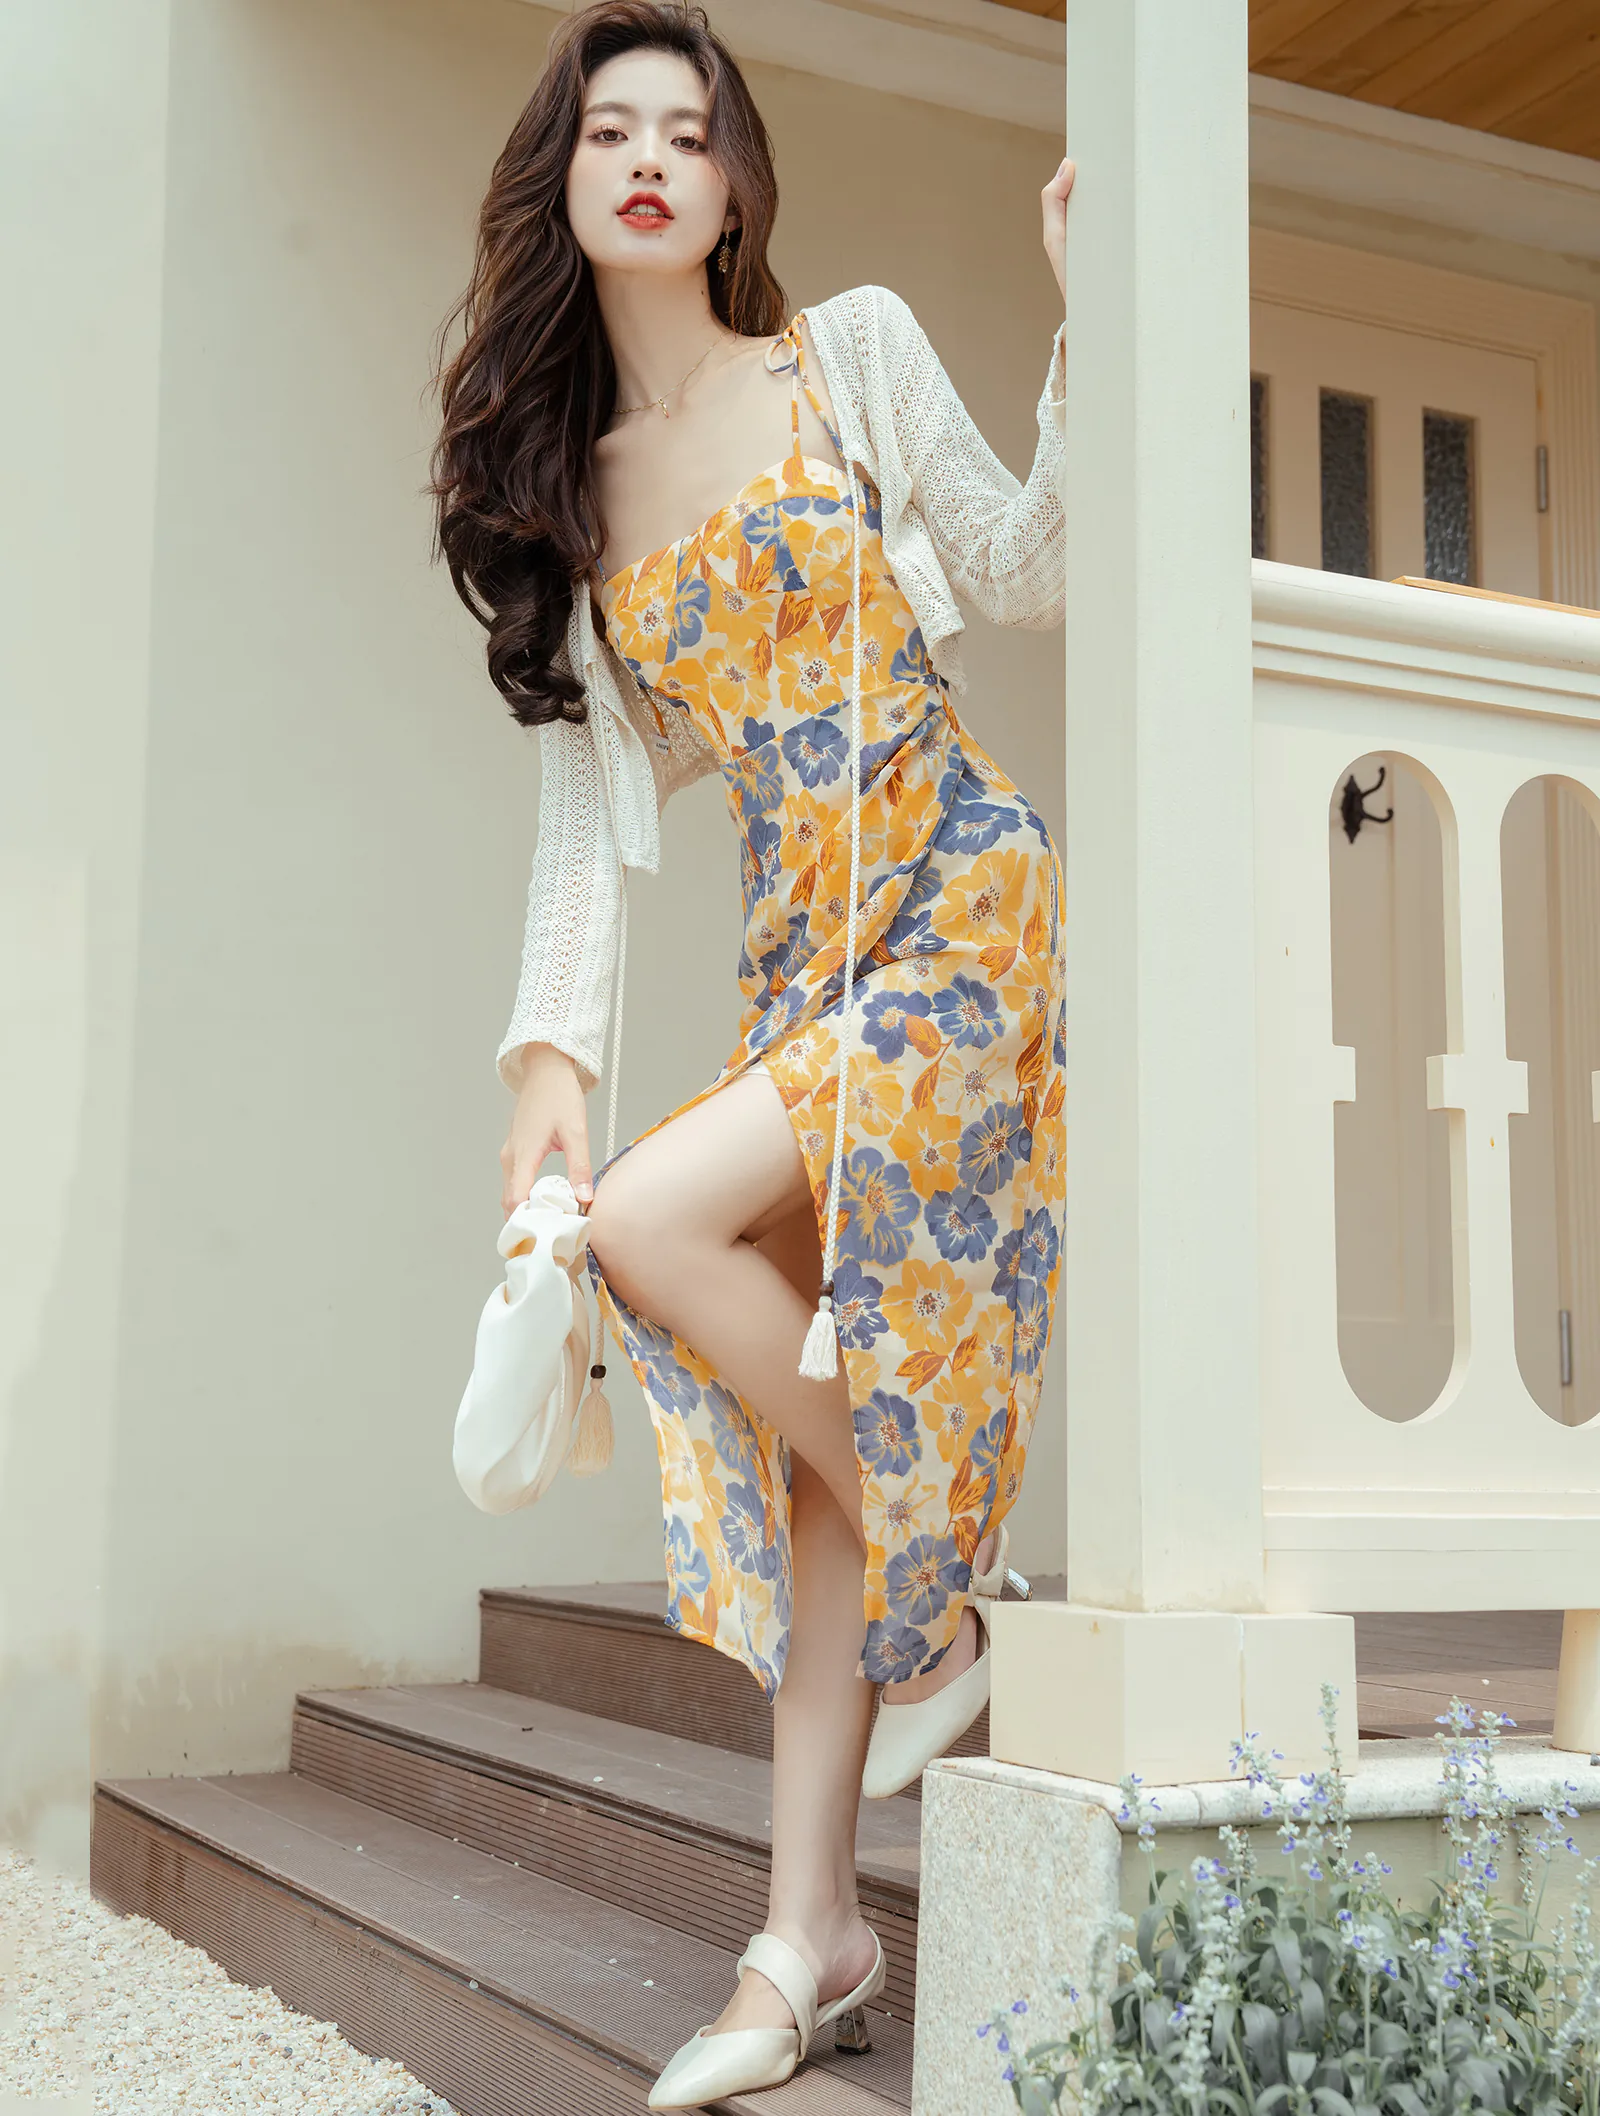 Sweet Floral Printed Yellow Summer Beach Slip Dress with Knit Cardigan05